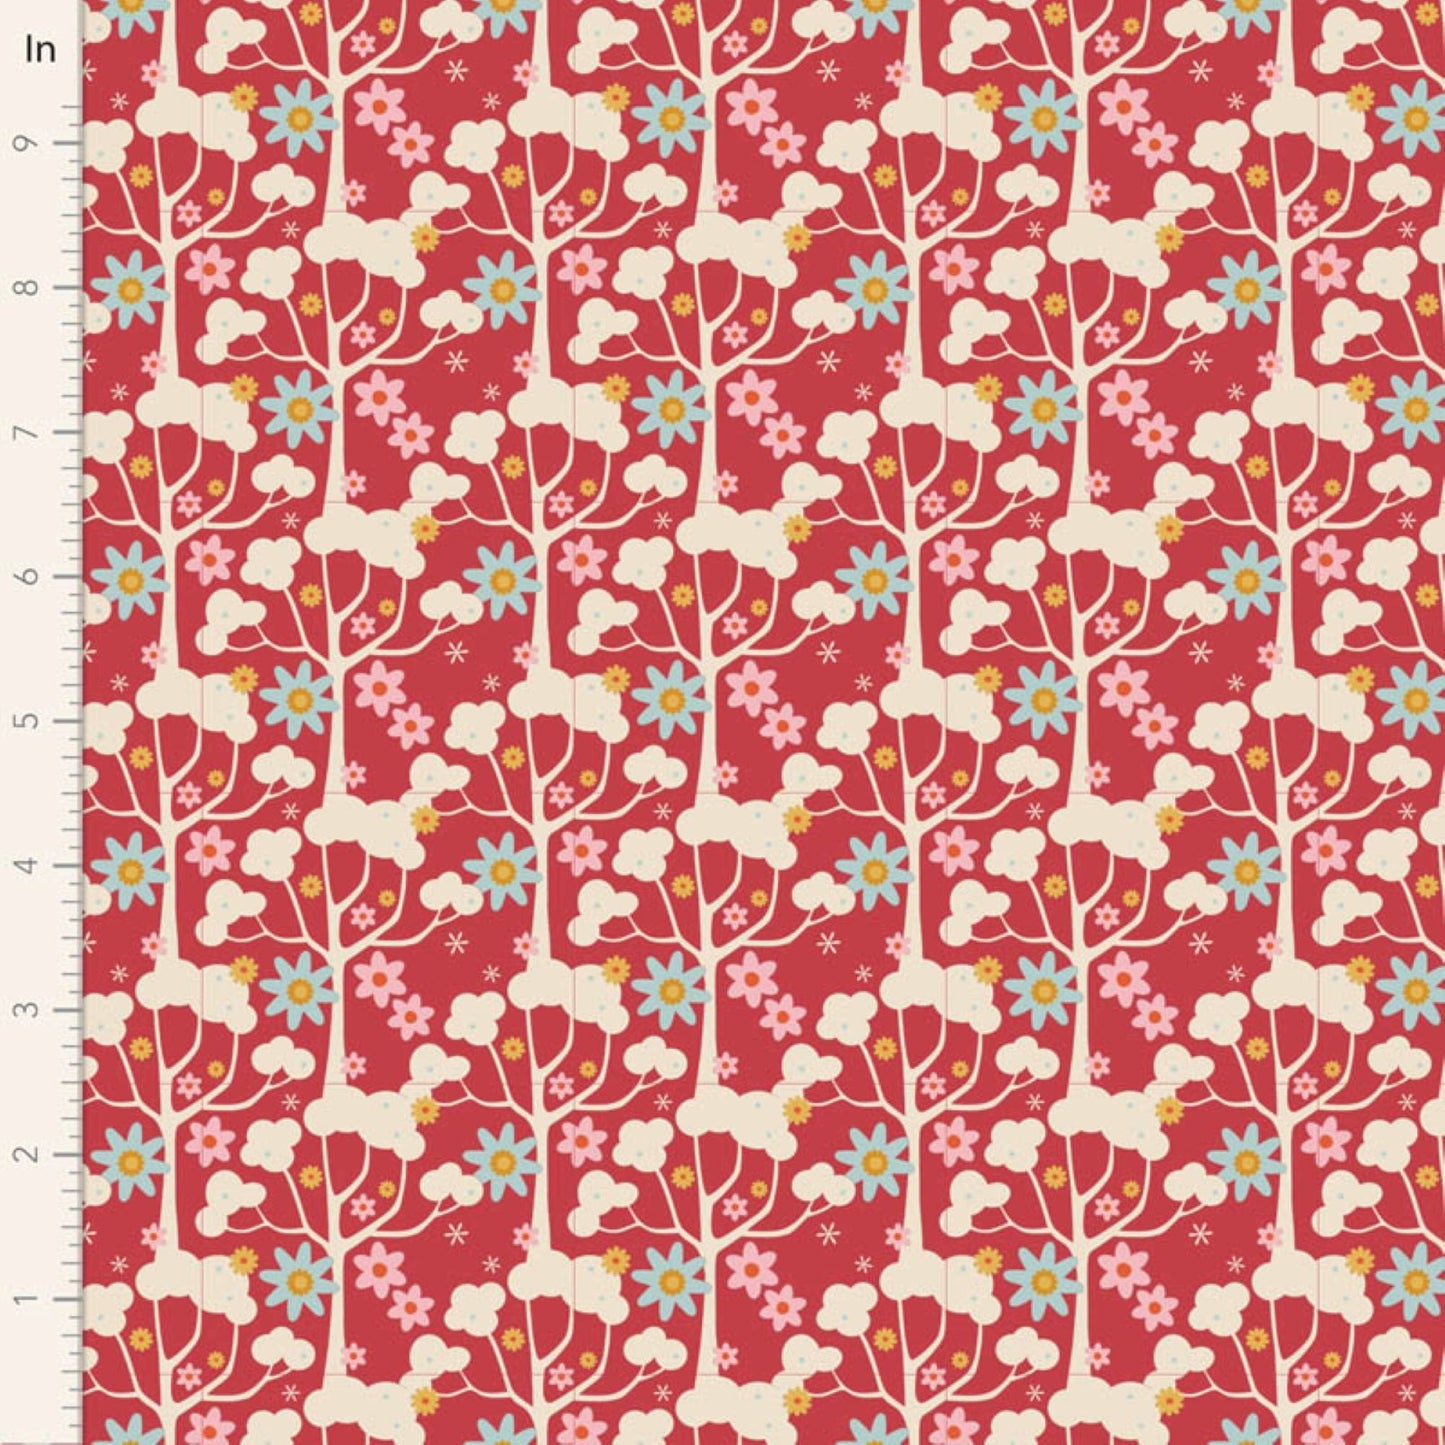 Tilda Jubilee and Farm Flowers floral red bundle 7 Fat 16's cotton quilt fabric